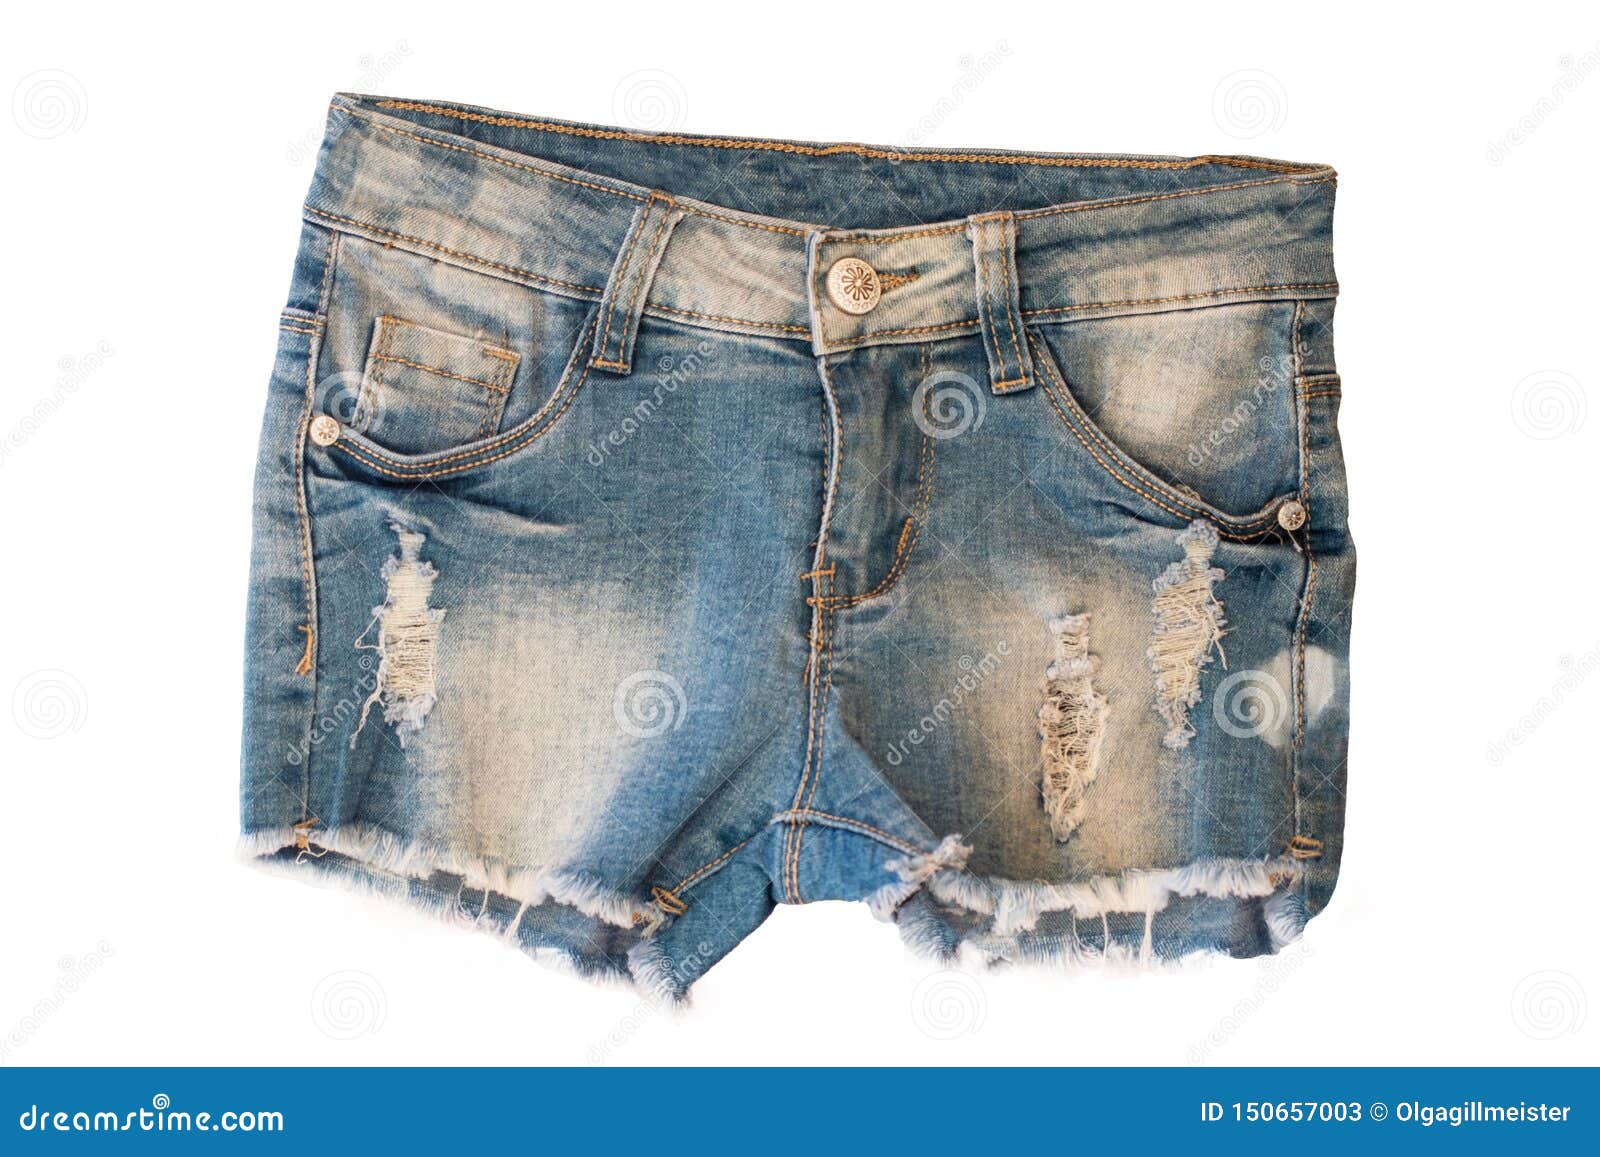 Summer Denim Shorts For Teenage Girls Elastic Waist, Wide Leg, Ladies Short  Jeans Pants Perfect For Beach And Casual Wear From Henryk, $20.32 |  DHgate.Com